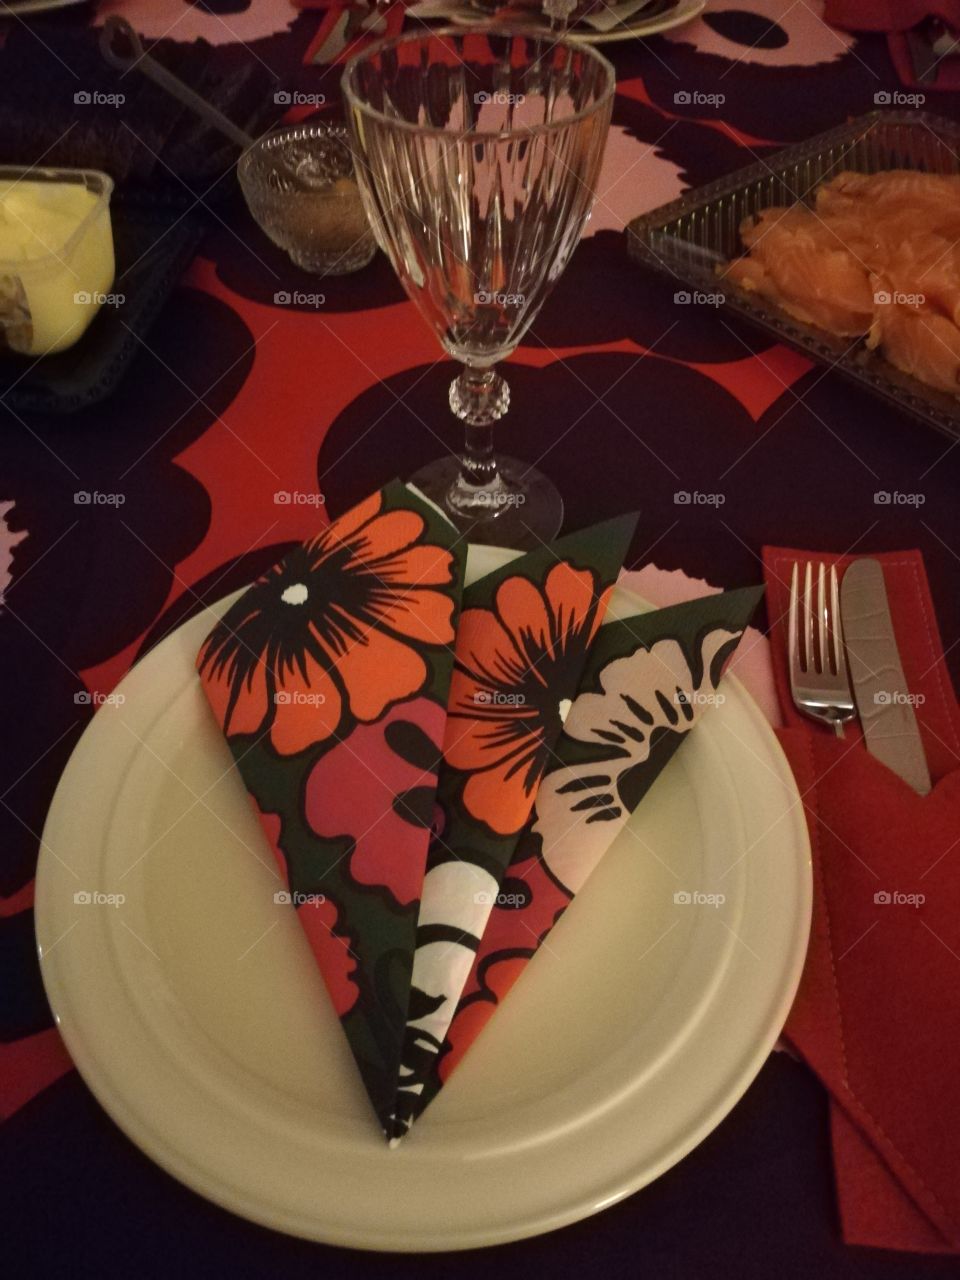 On a multicoloured table cloth a plate with a patterned napkin, a knife and a fork in a red pocket, a wine glass. In the background butter, mustard and gravlax on a green plate.